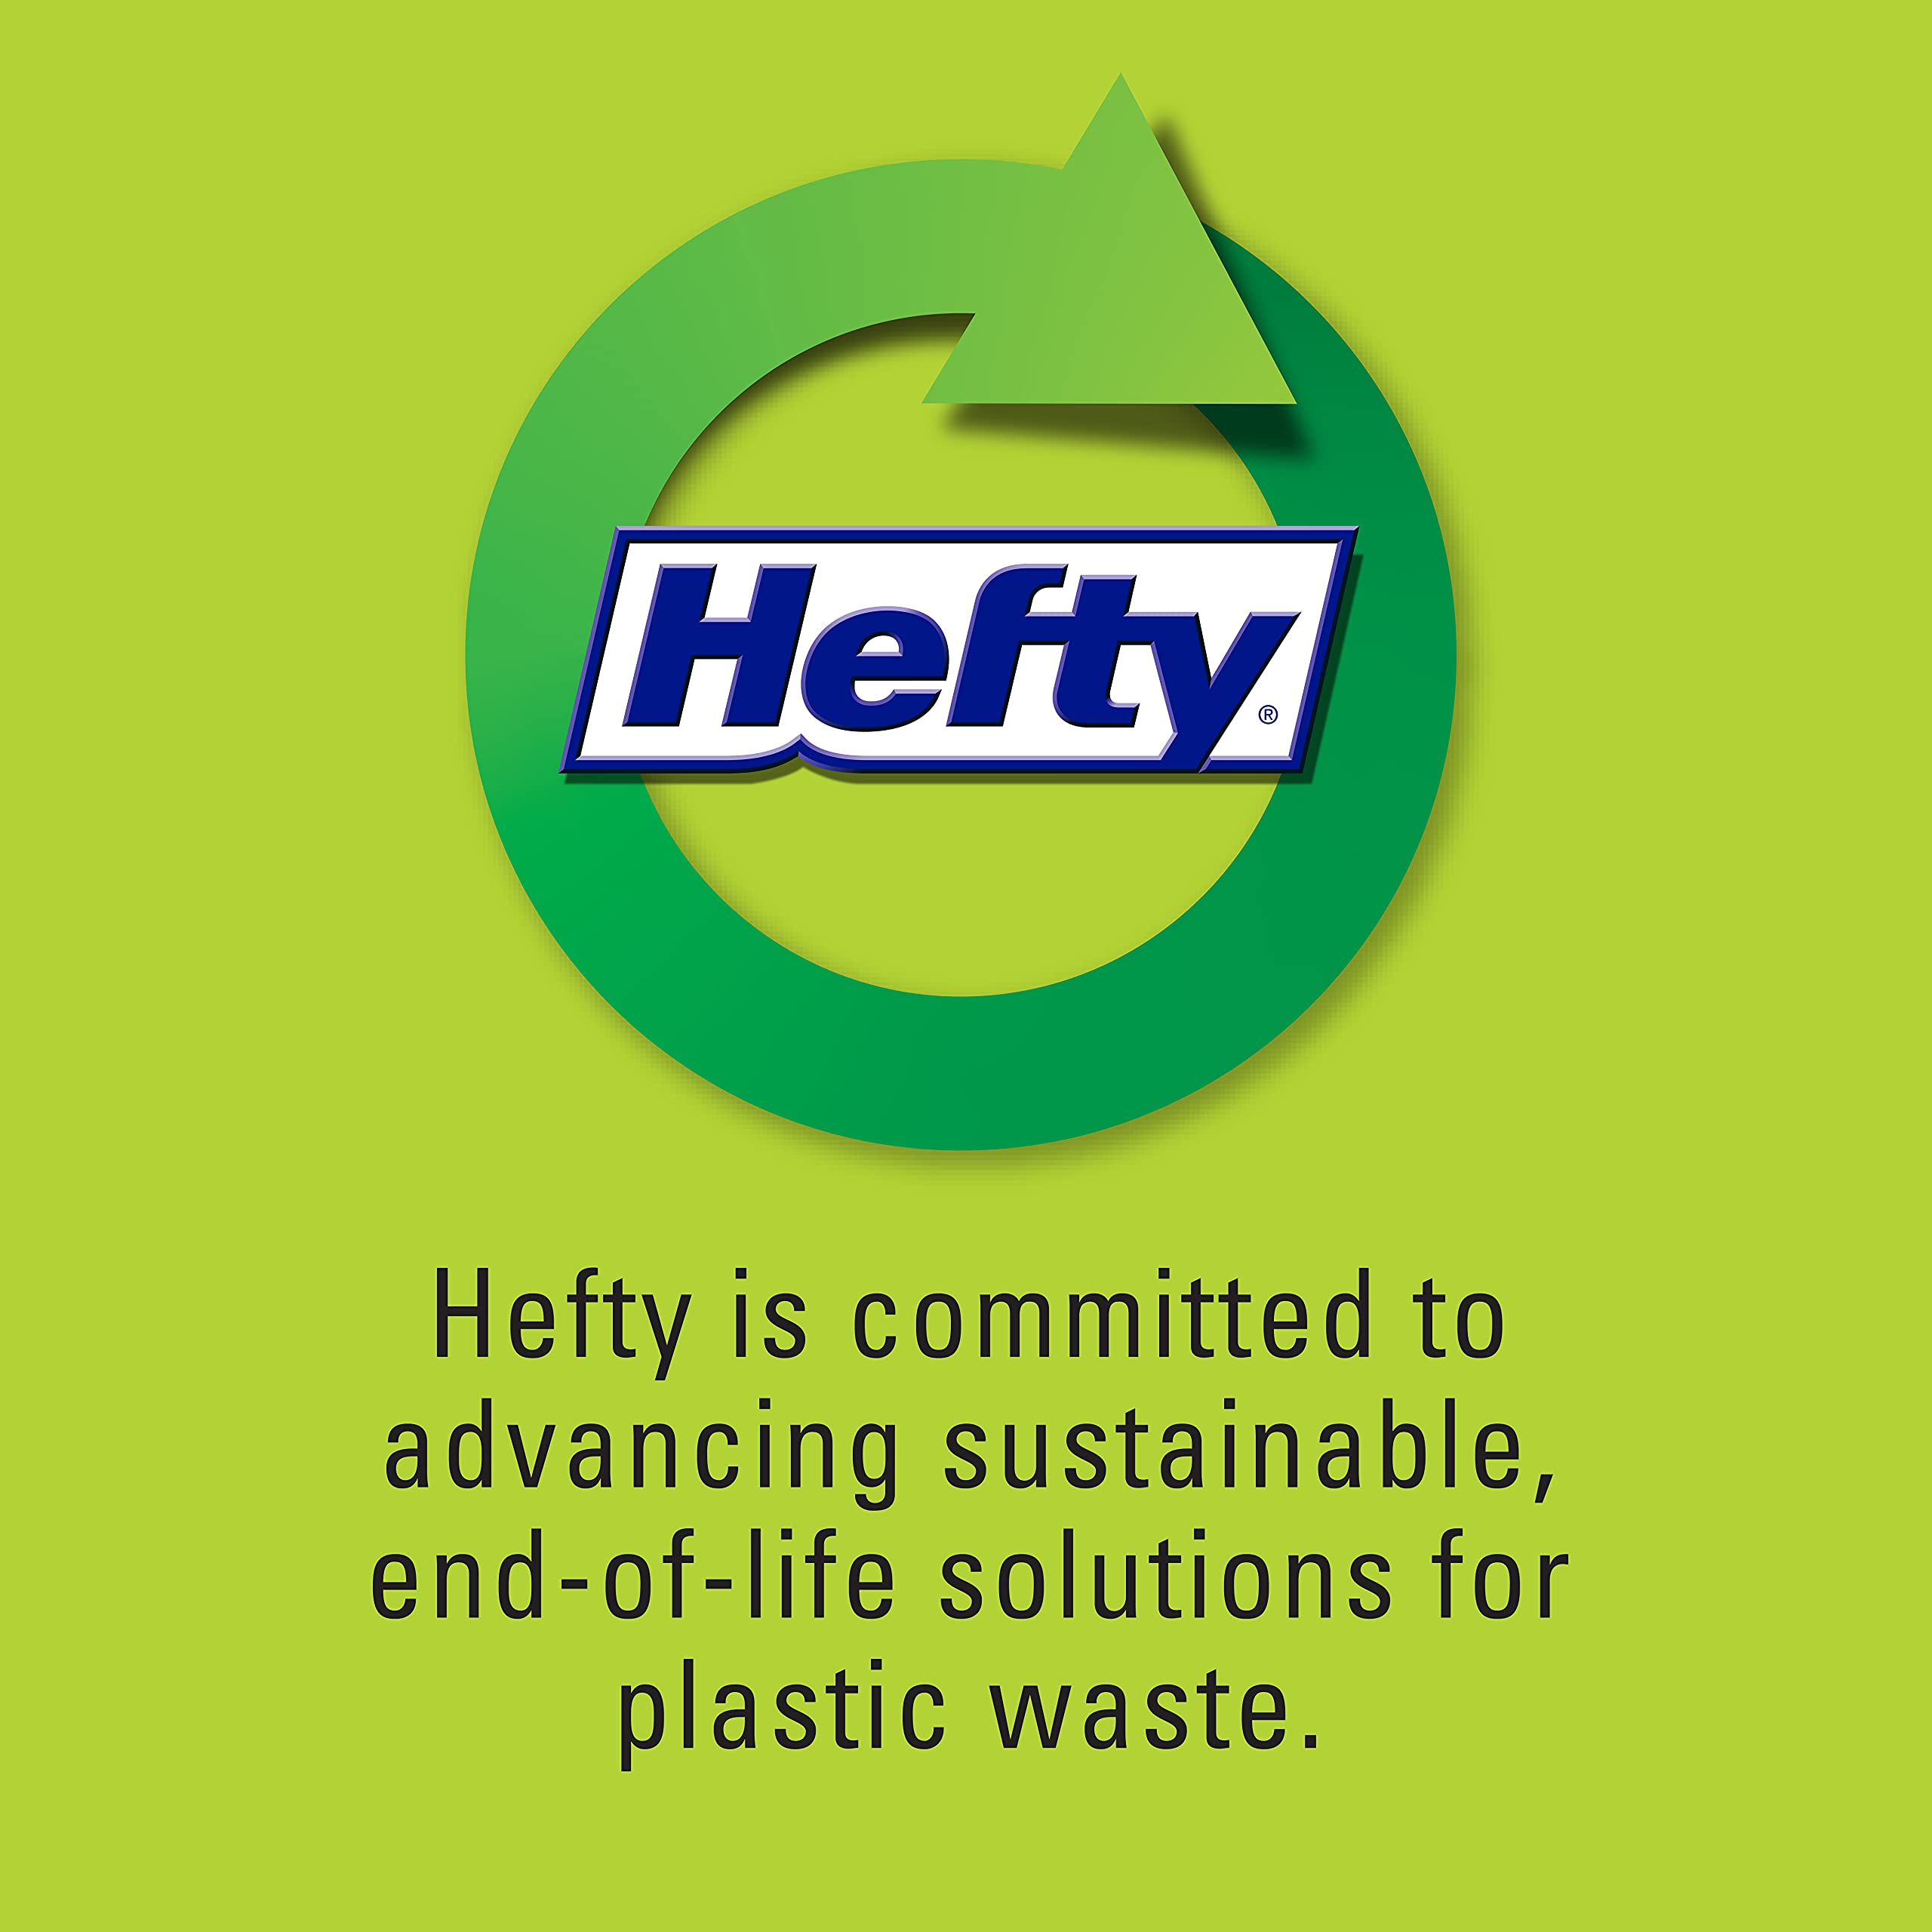 Hefty Ultra Strong Tall Kitchen Trash Bags, Blackout, Unscented, 13 Gallon, 40 Count